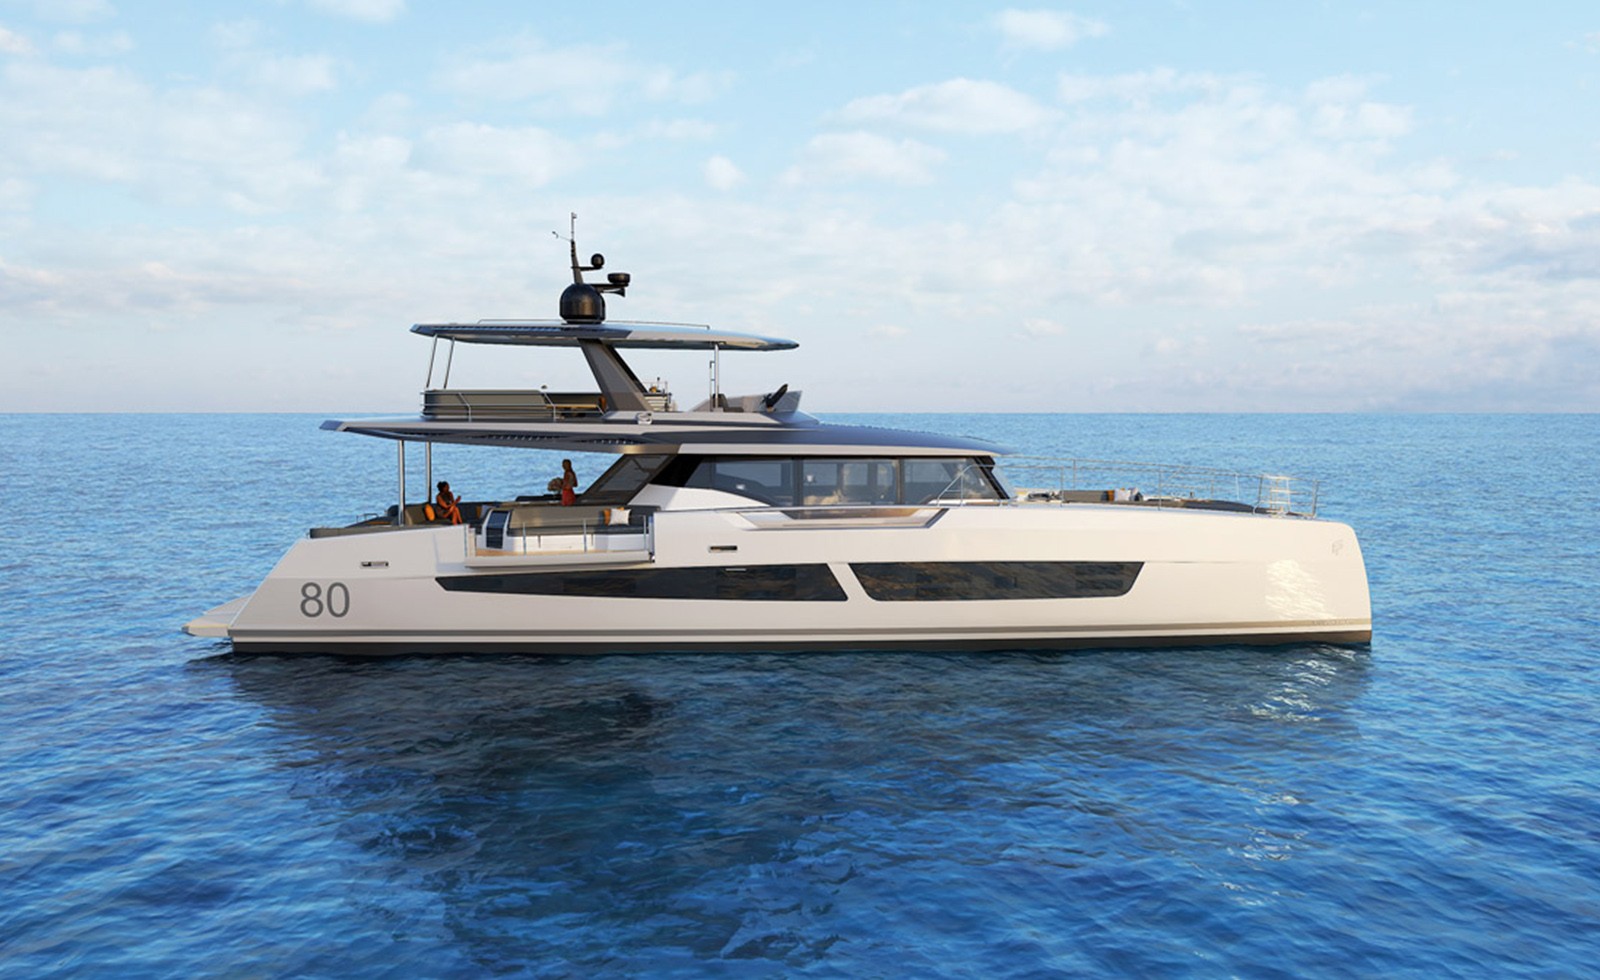 A World Premiere at Cannes for the Fountaine Pajot Thíra 80